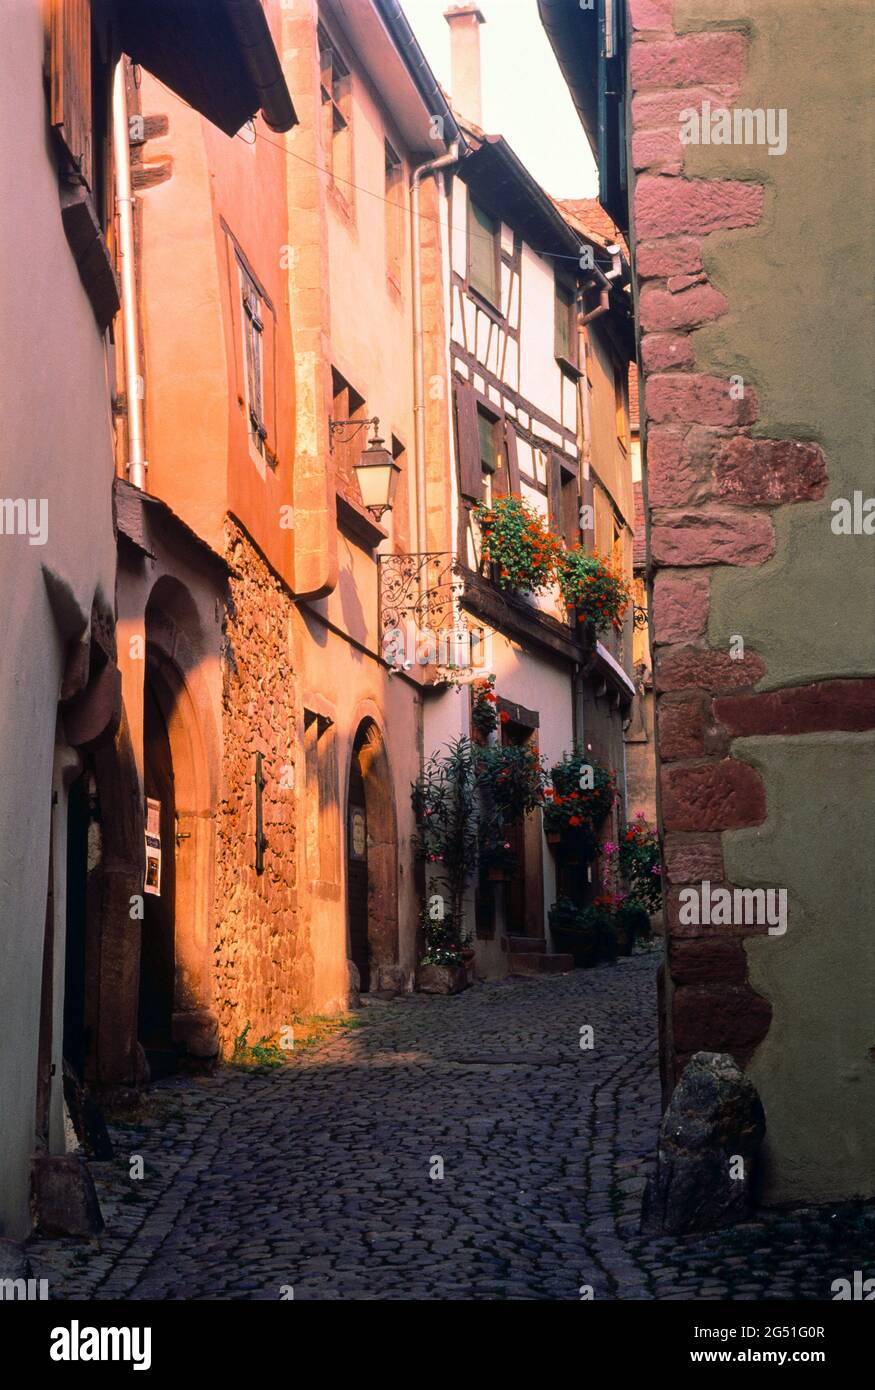 View of street between buildings, Riquewihr, Alsace, France Stock Photo